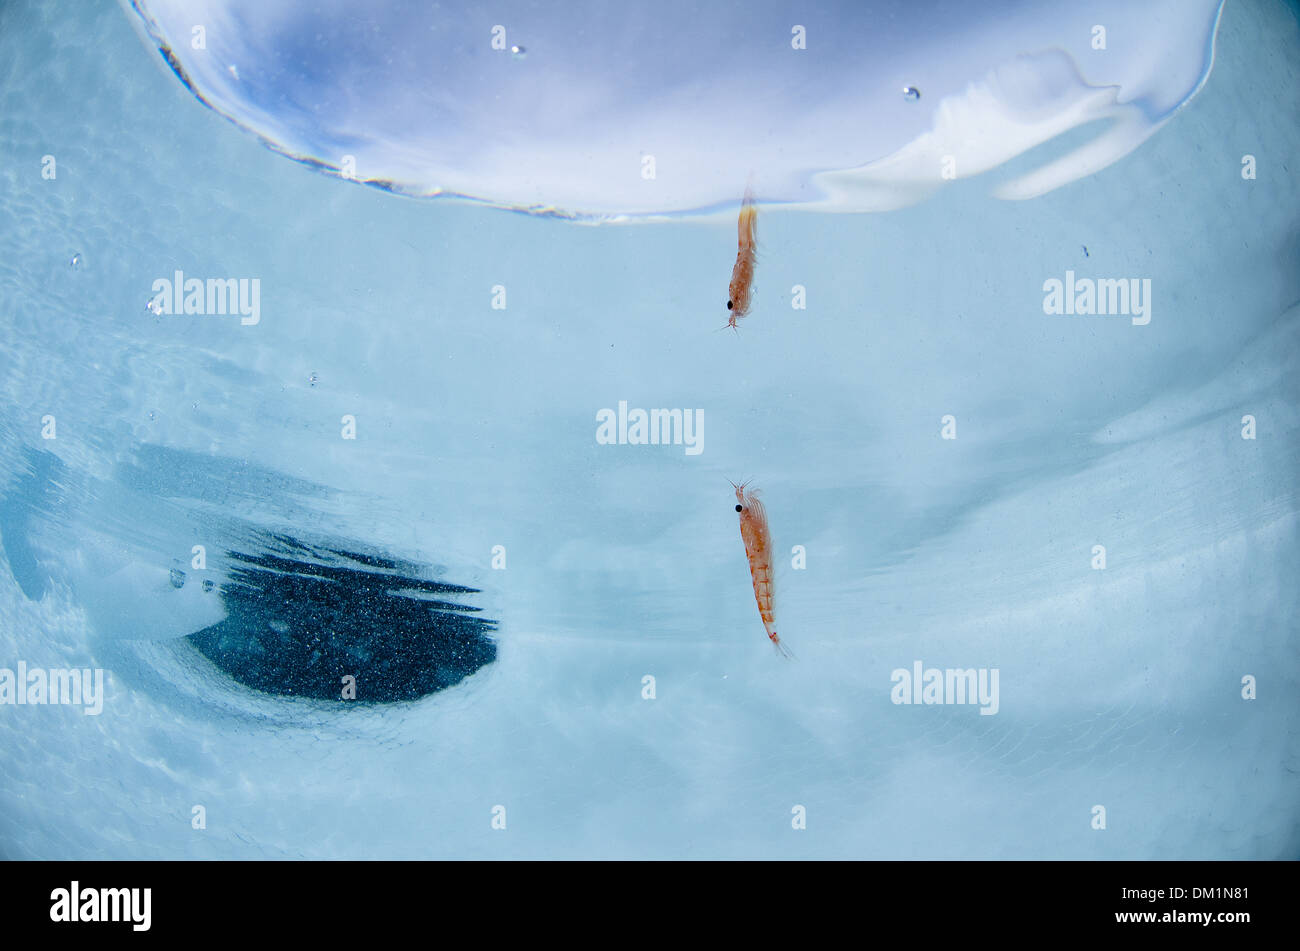 antarctic krill Euphausia superba swimming near a iceberg reflecting on the surface of the water Stock Photo